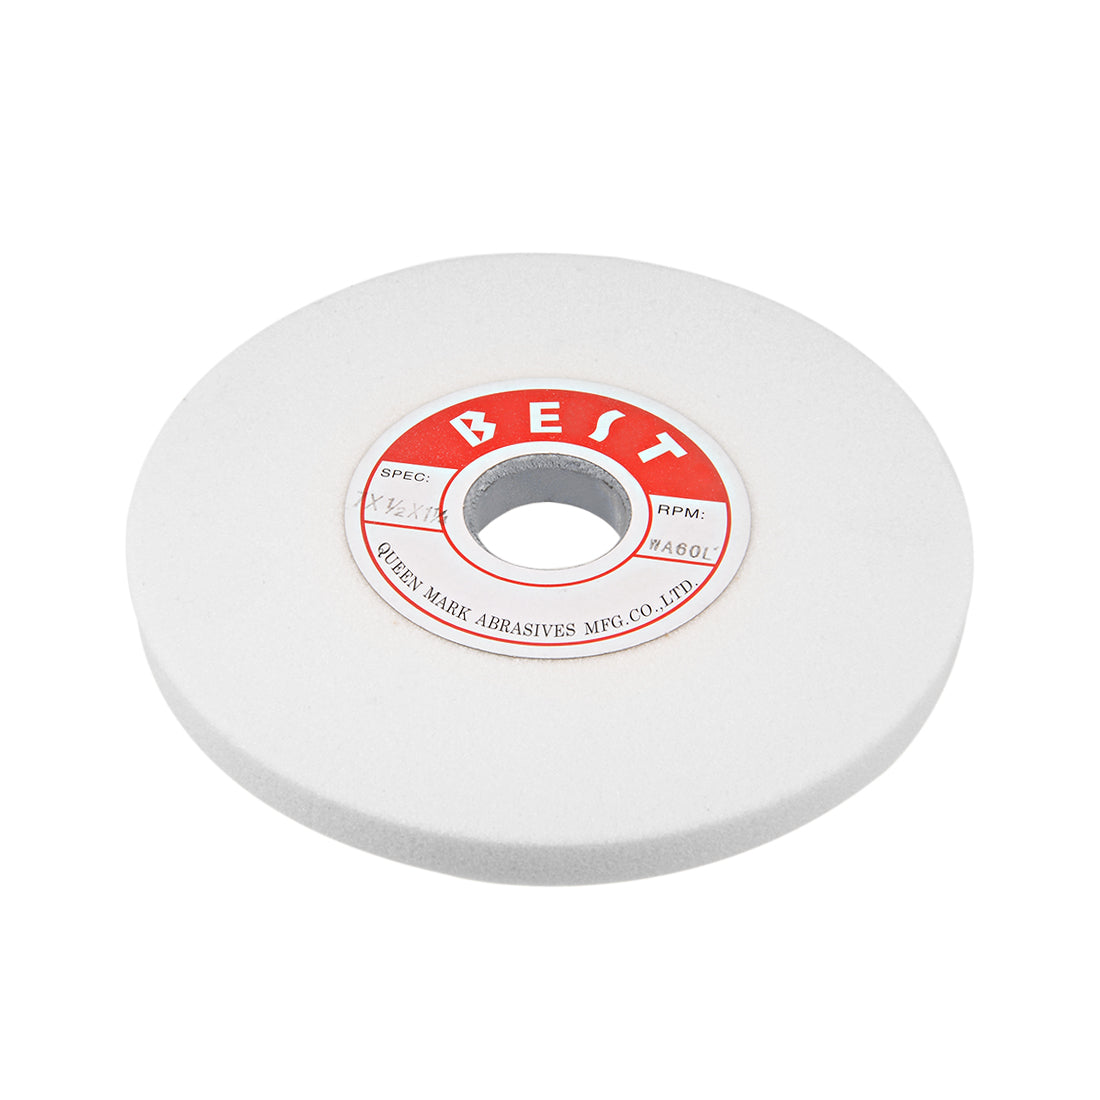 Uxcell Uxcell 7-Inch Bench Grinding Wheels White Aluminum Oxide WA 100 Grit for Surface Grinding